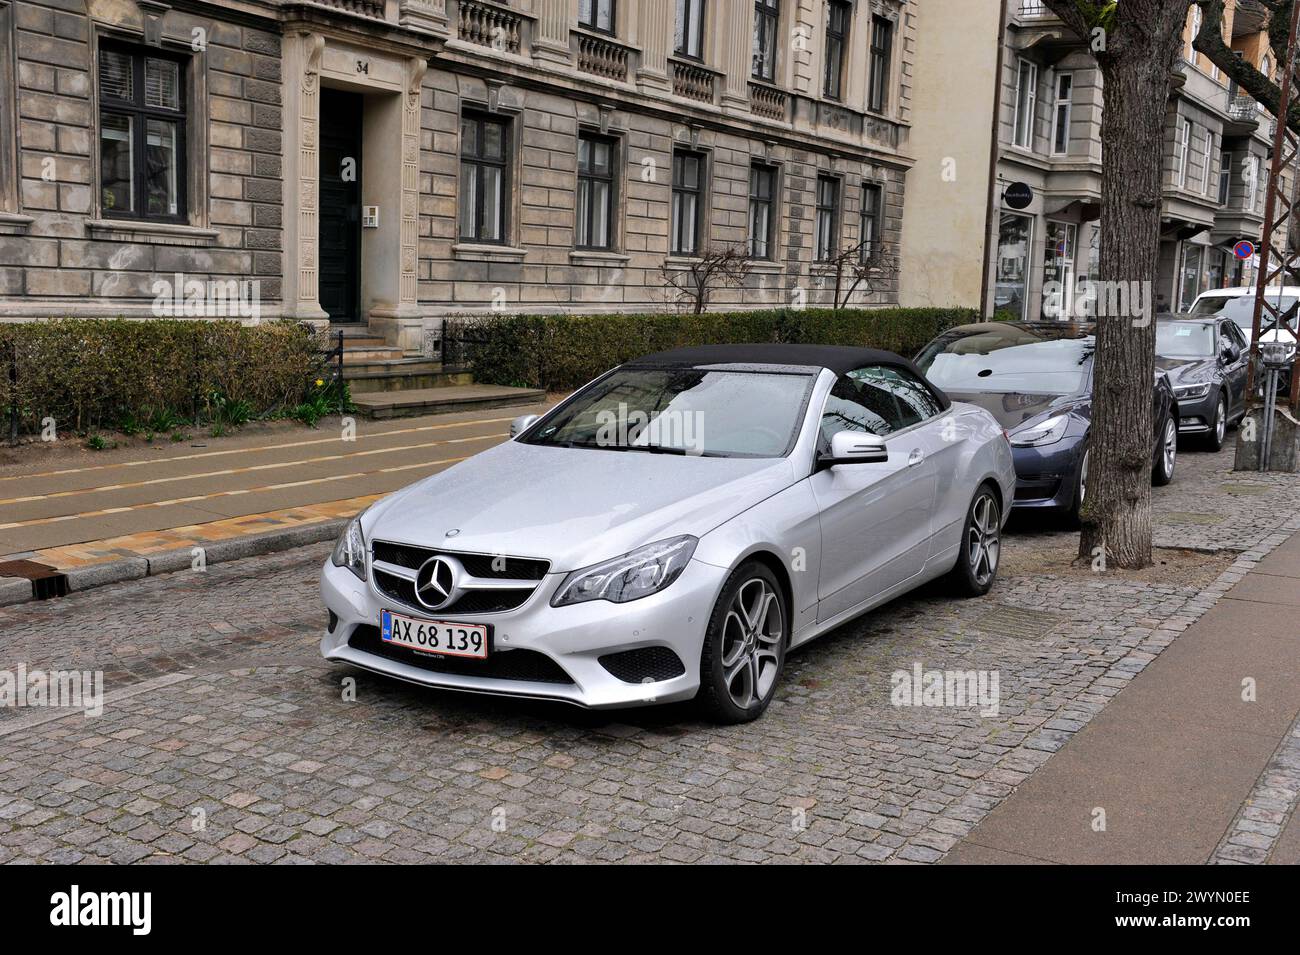 Contemporary model Mercedes Benz parked on the street of Frederiksberg, Copenhapen, Denmark, Europe Stock Photo